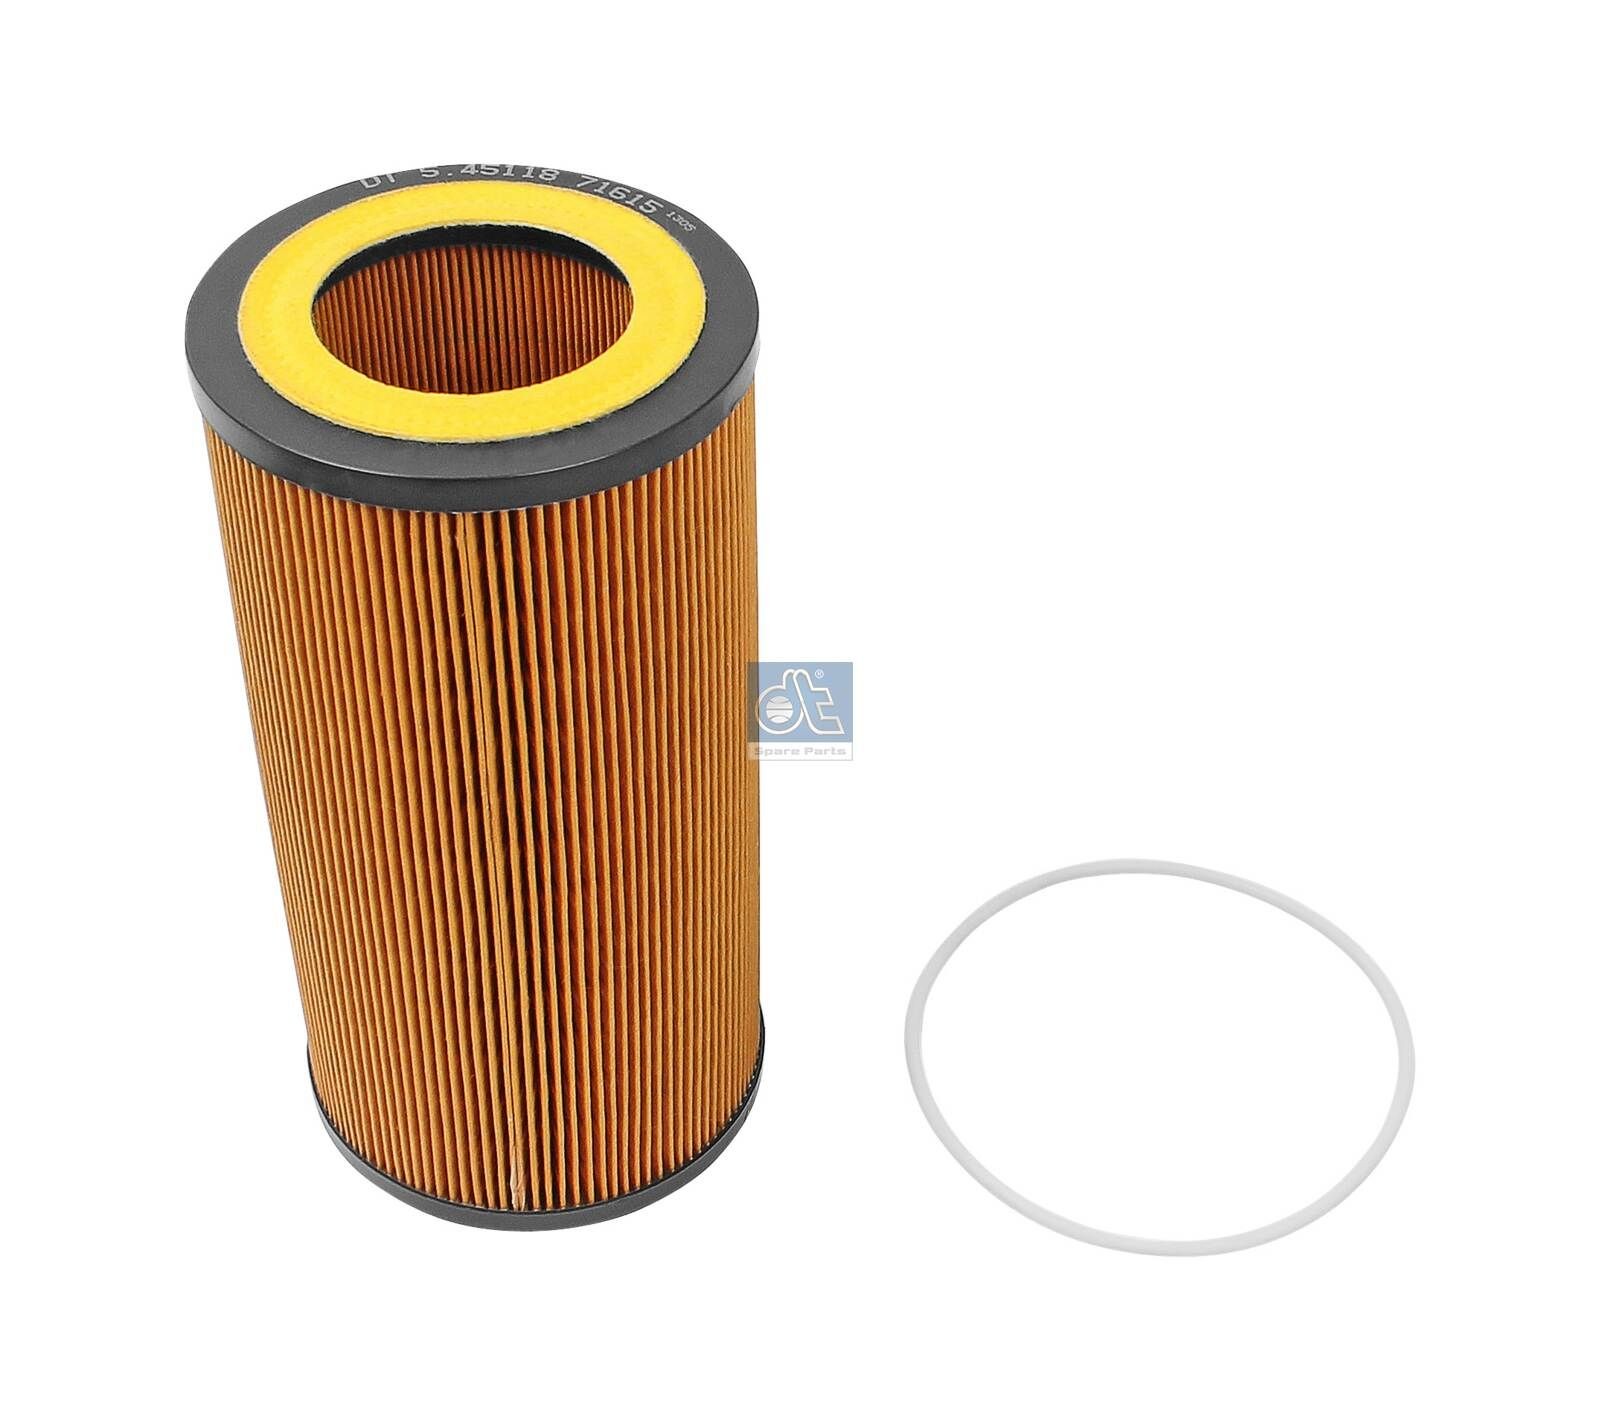 HU 1297 x DT Spare Parts 5.45118 Oil filter 0170445000